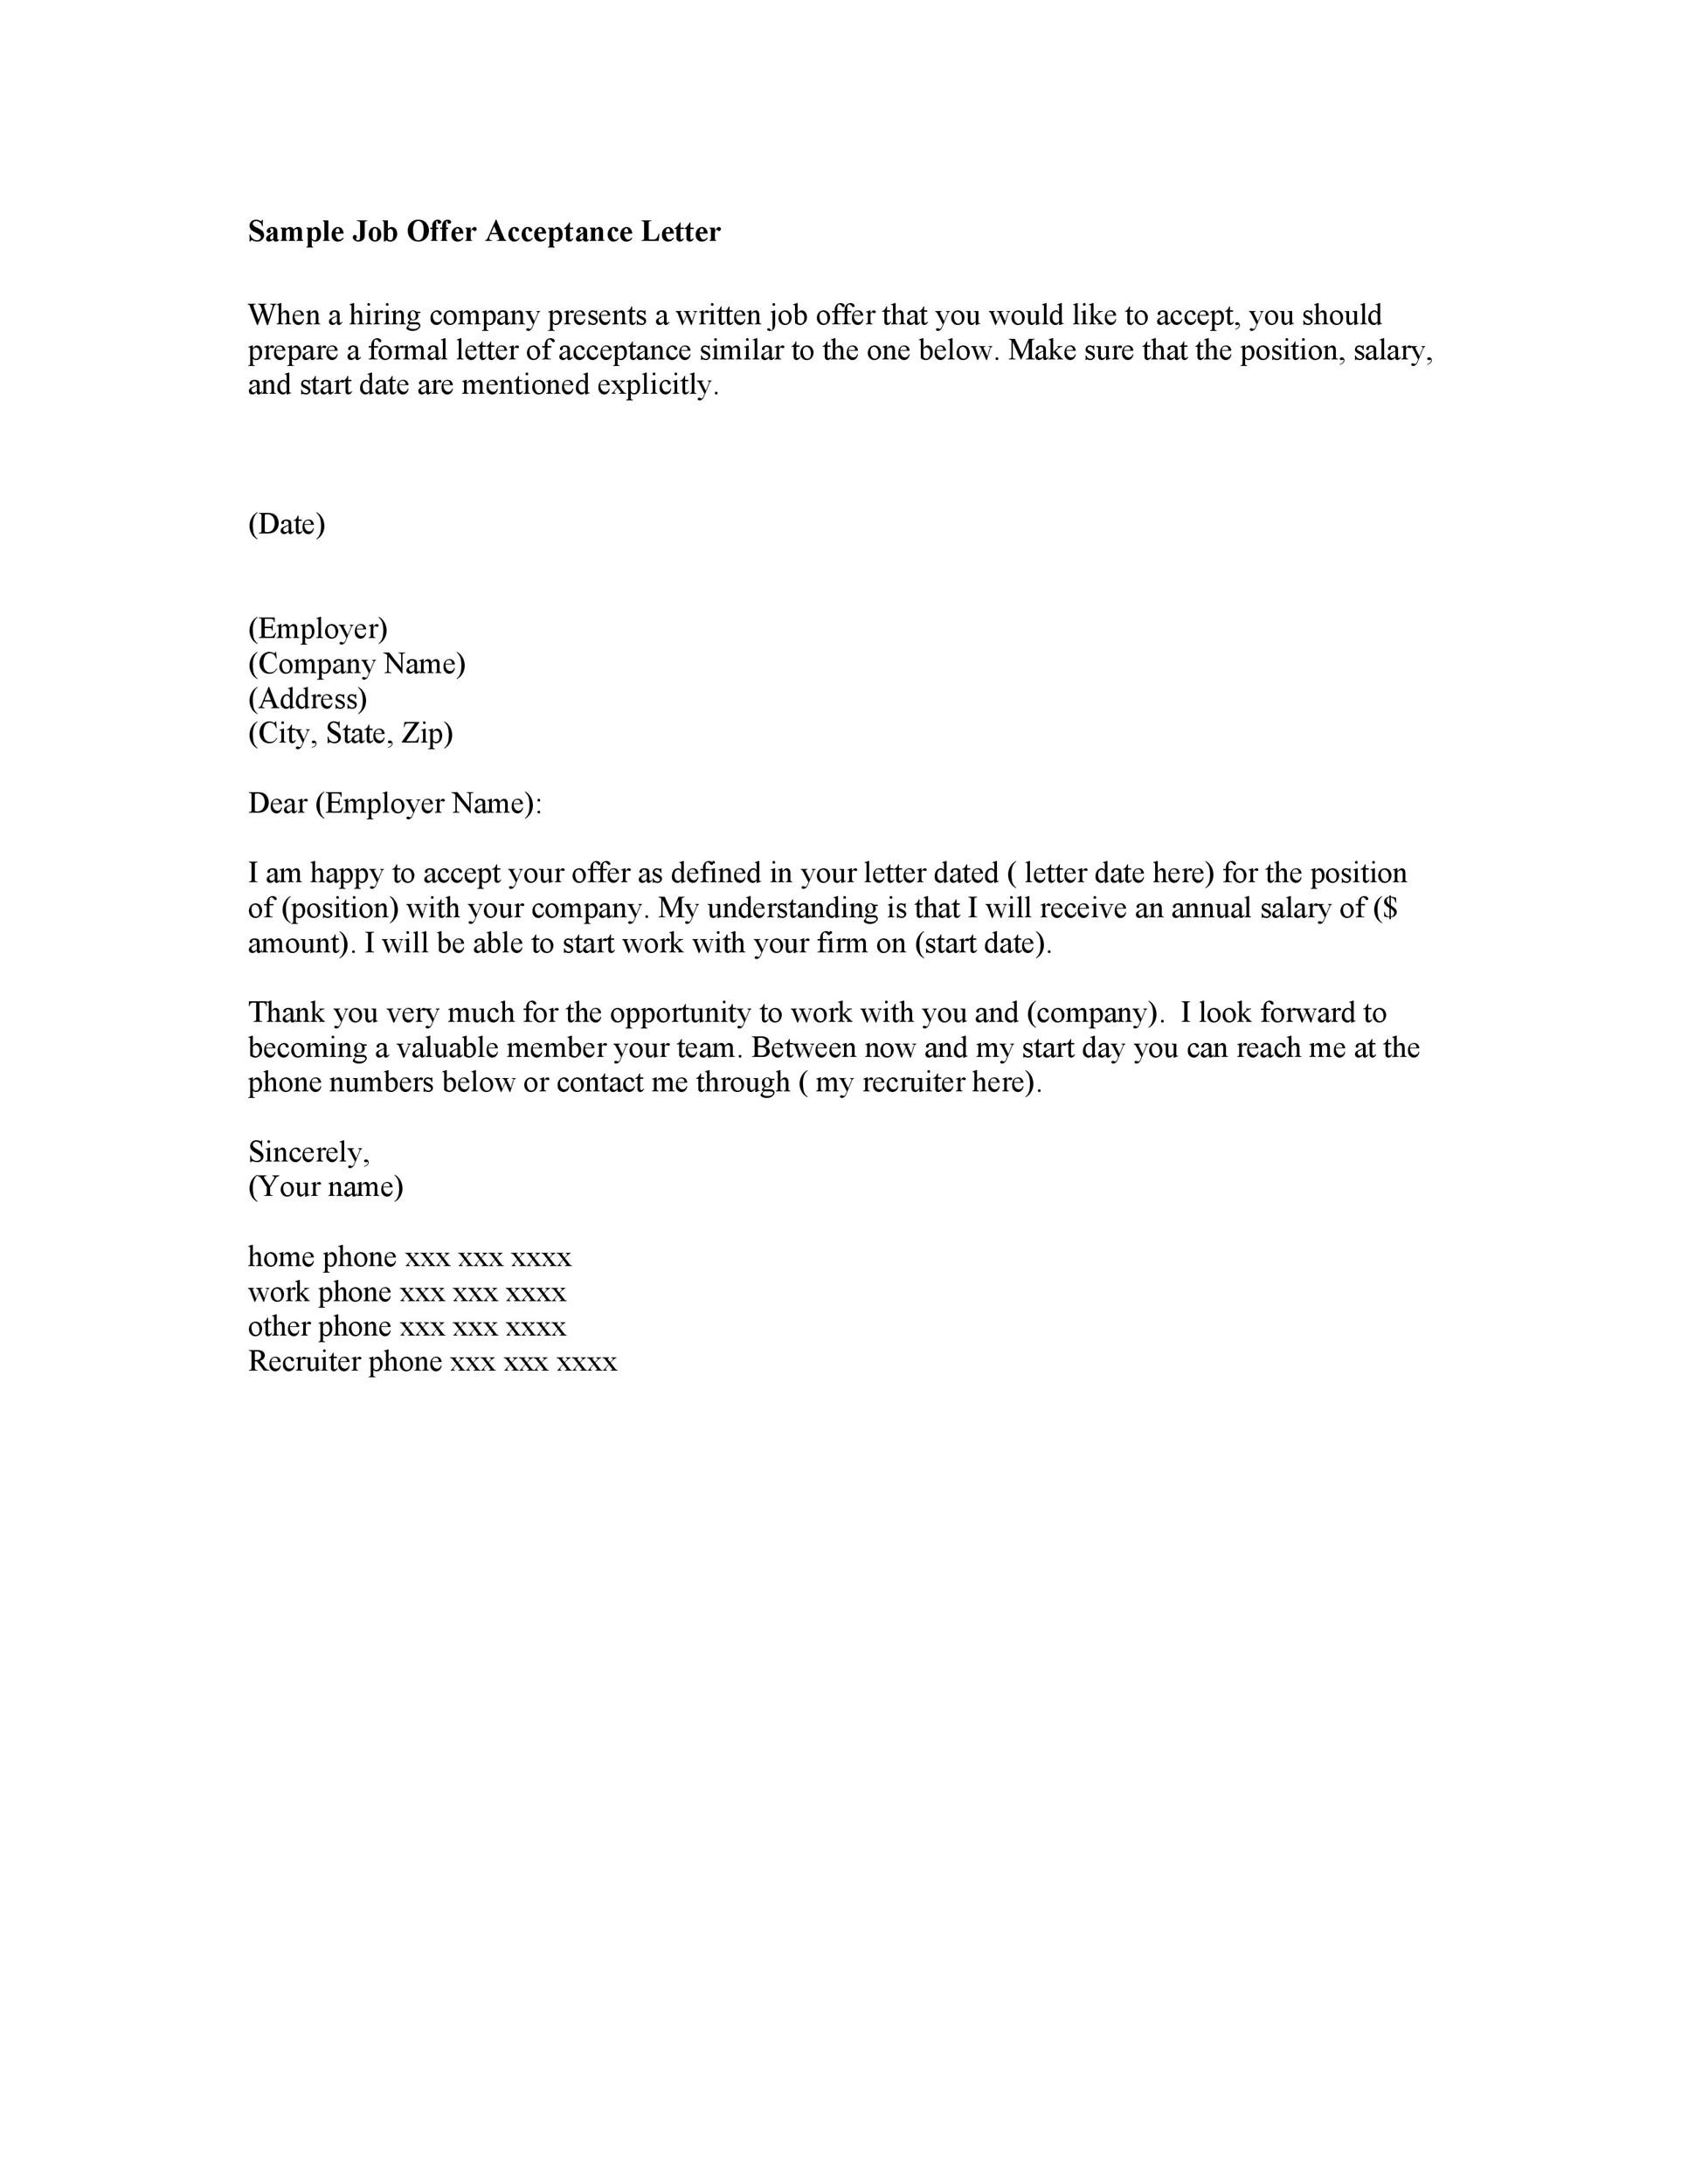 Law Firm Offer Letter from templatelab.com